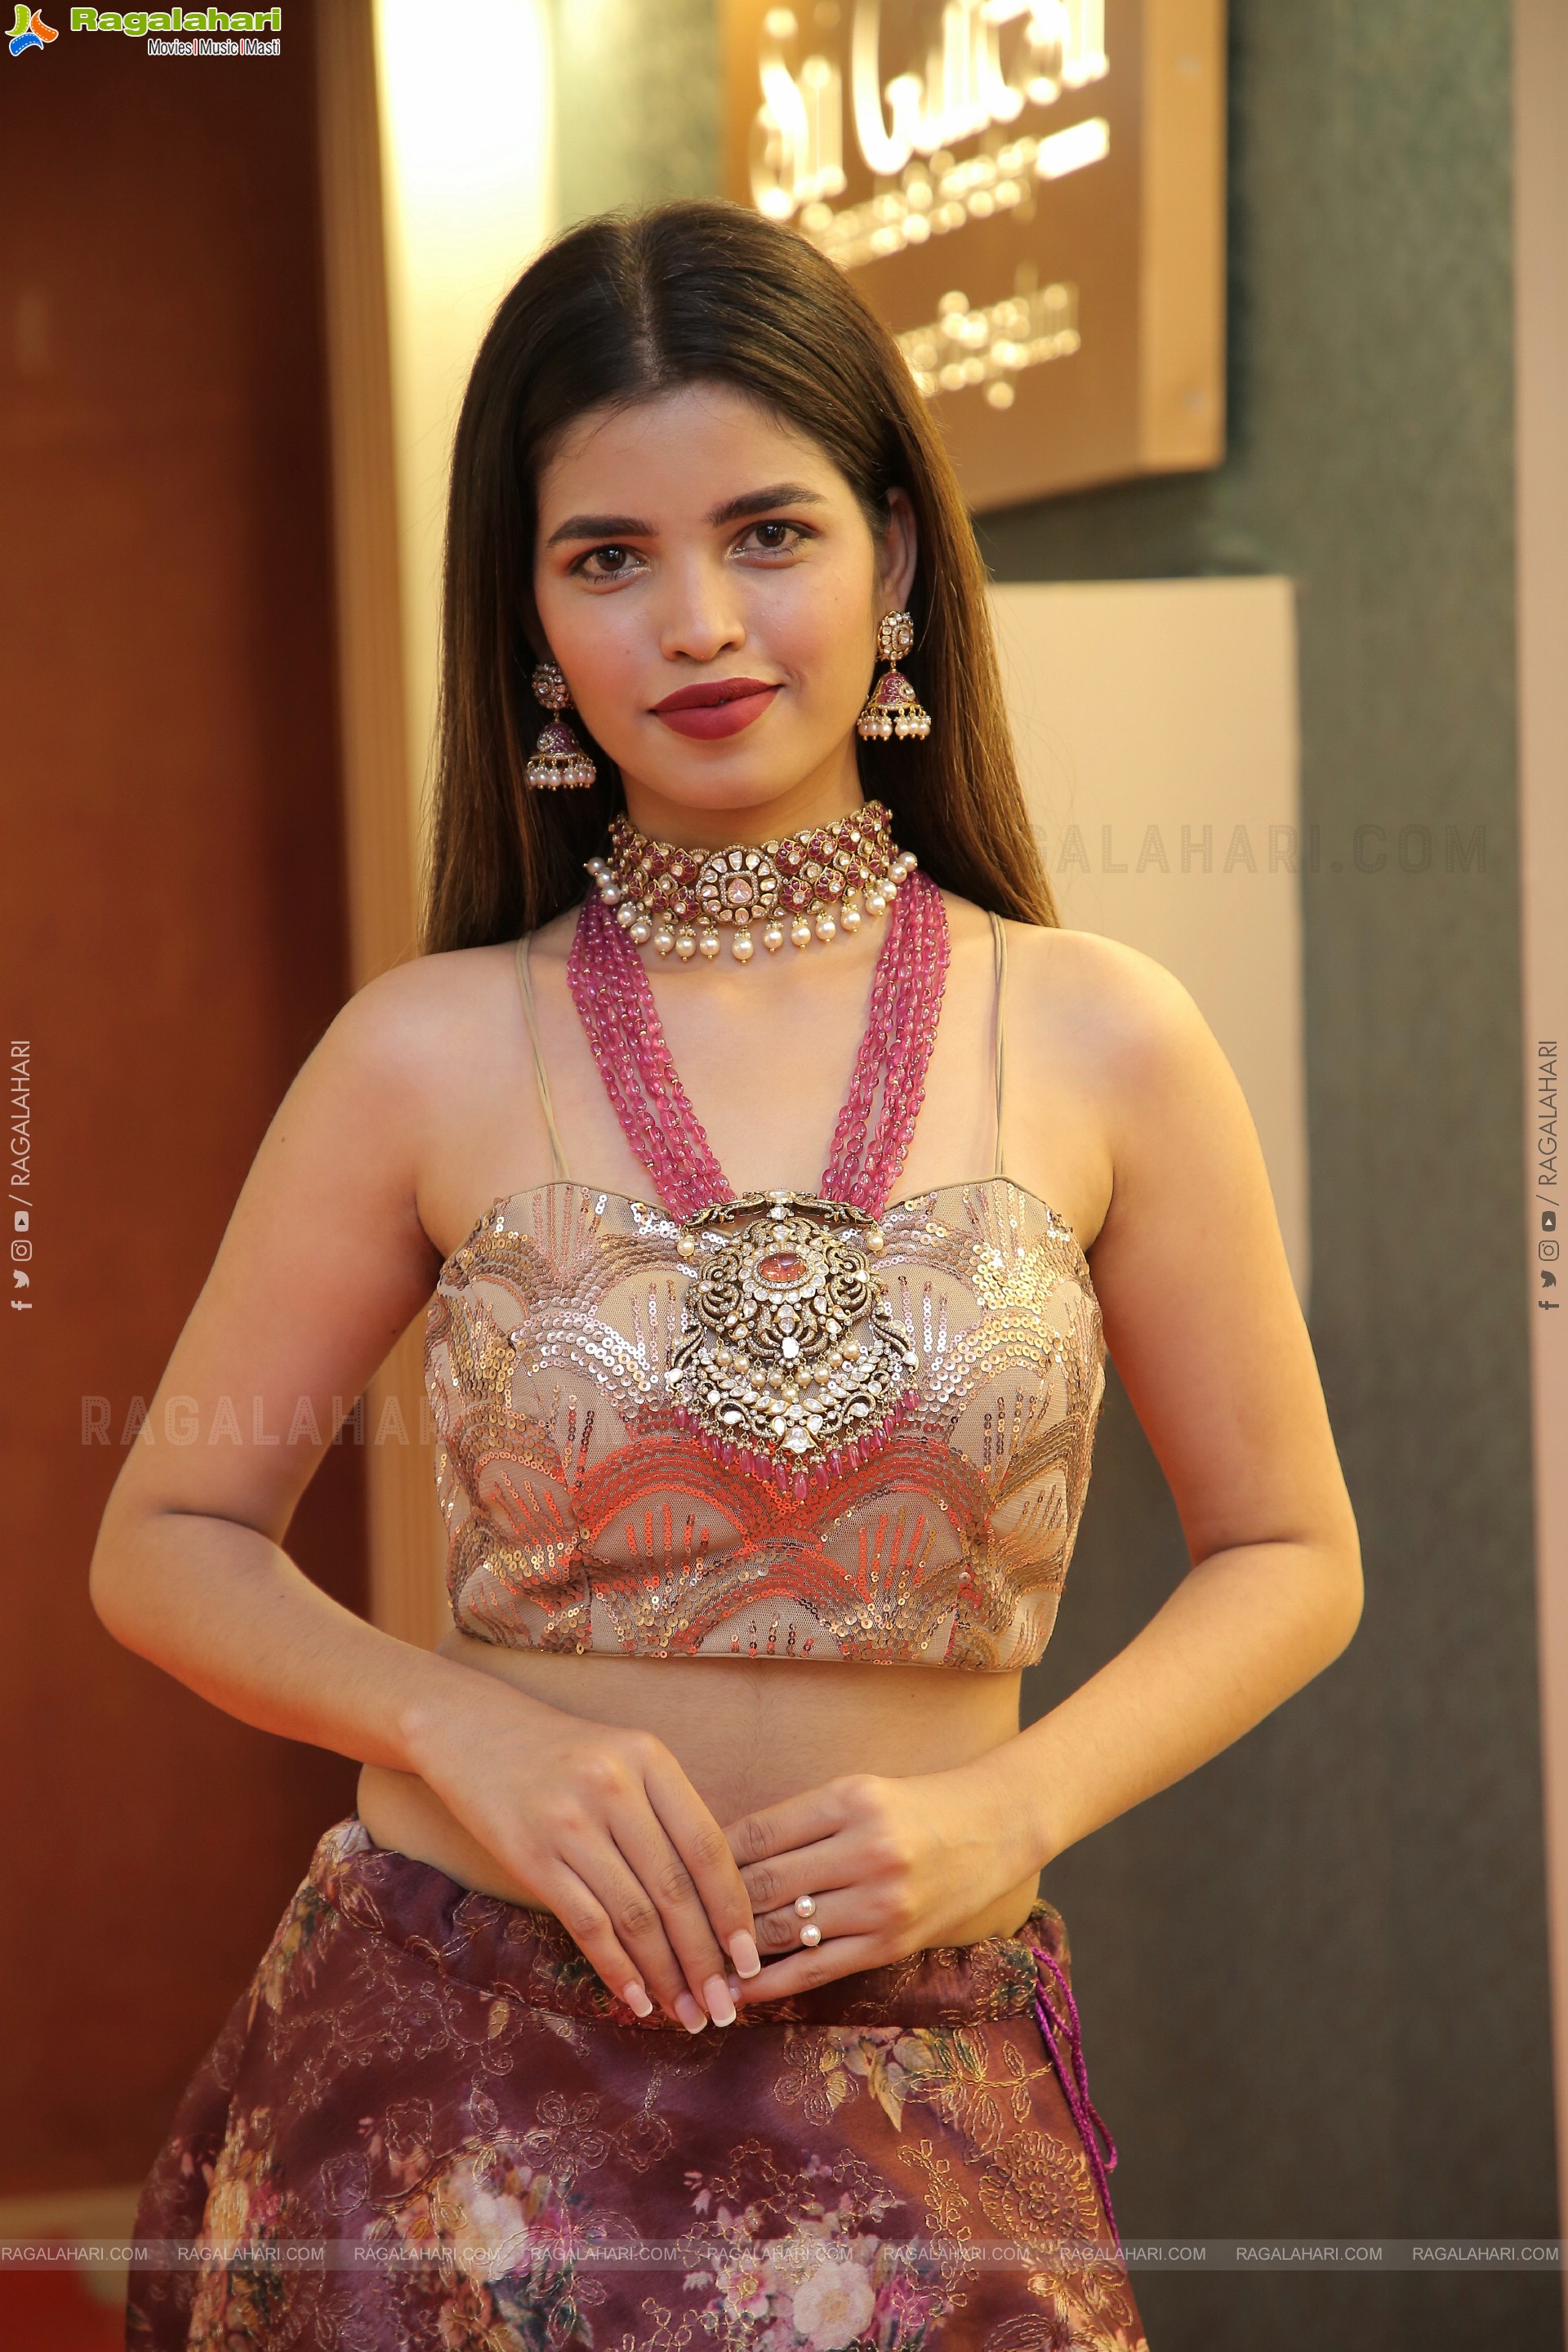 Urmila Chauhan Poses With Jewellery, HD Photo Gallery